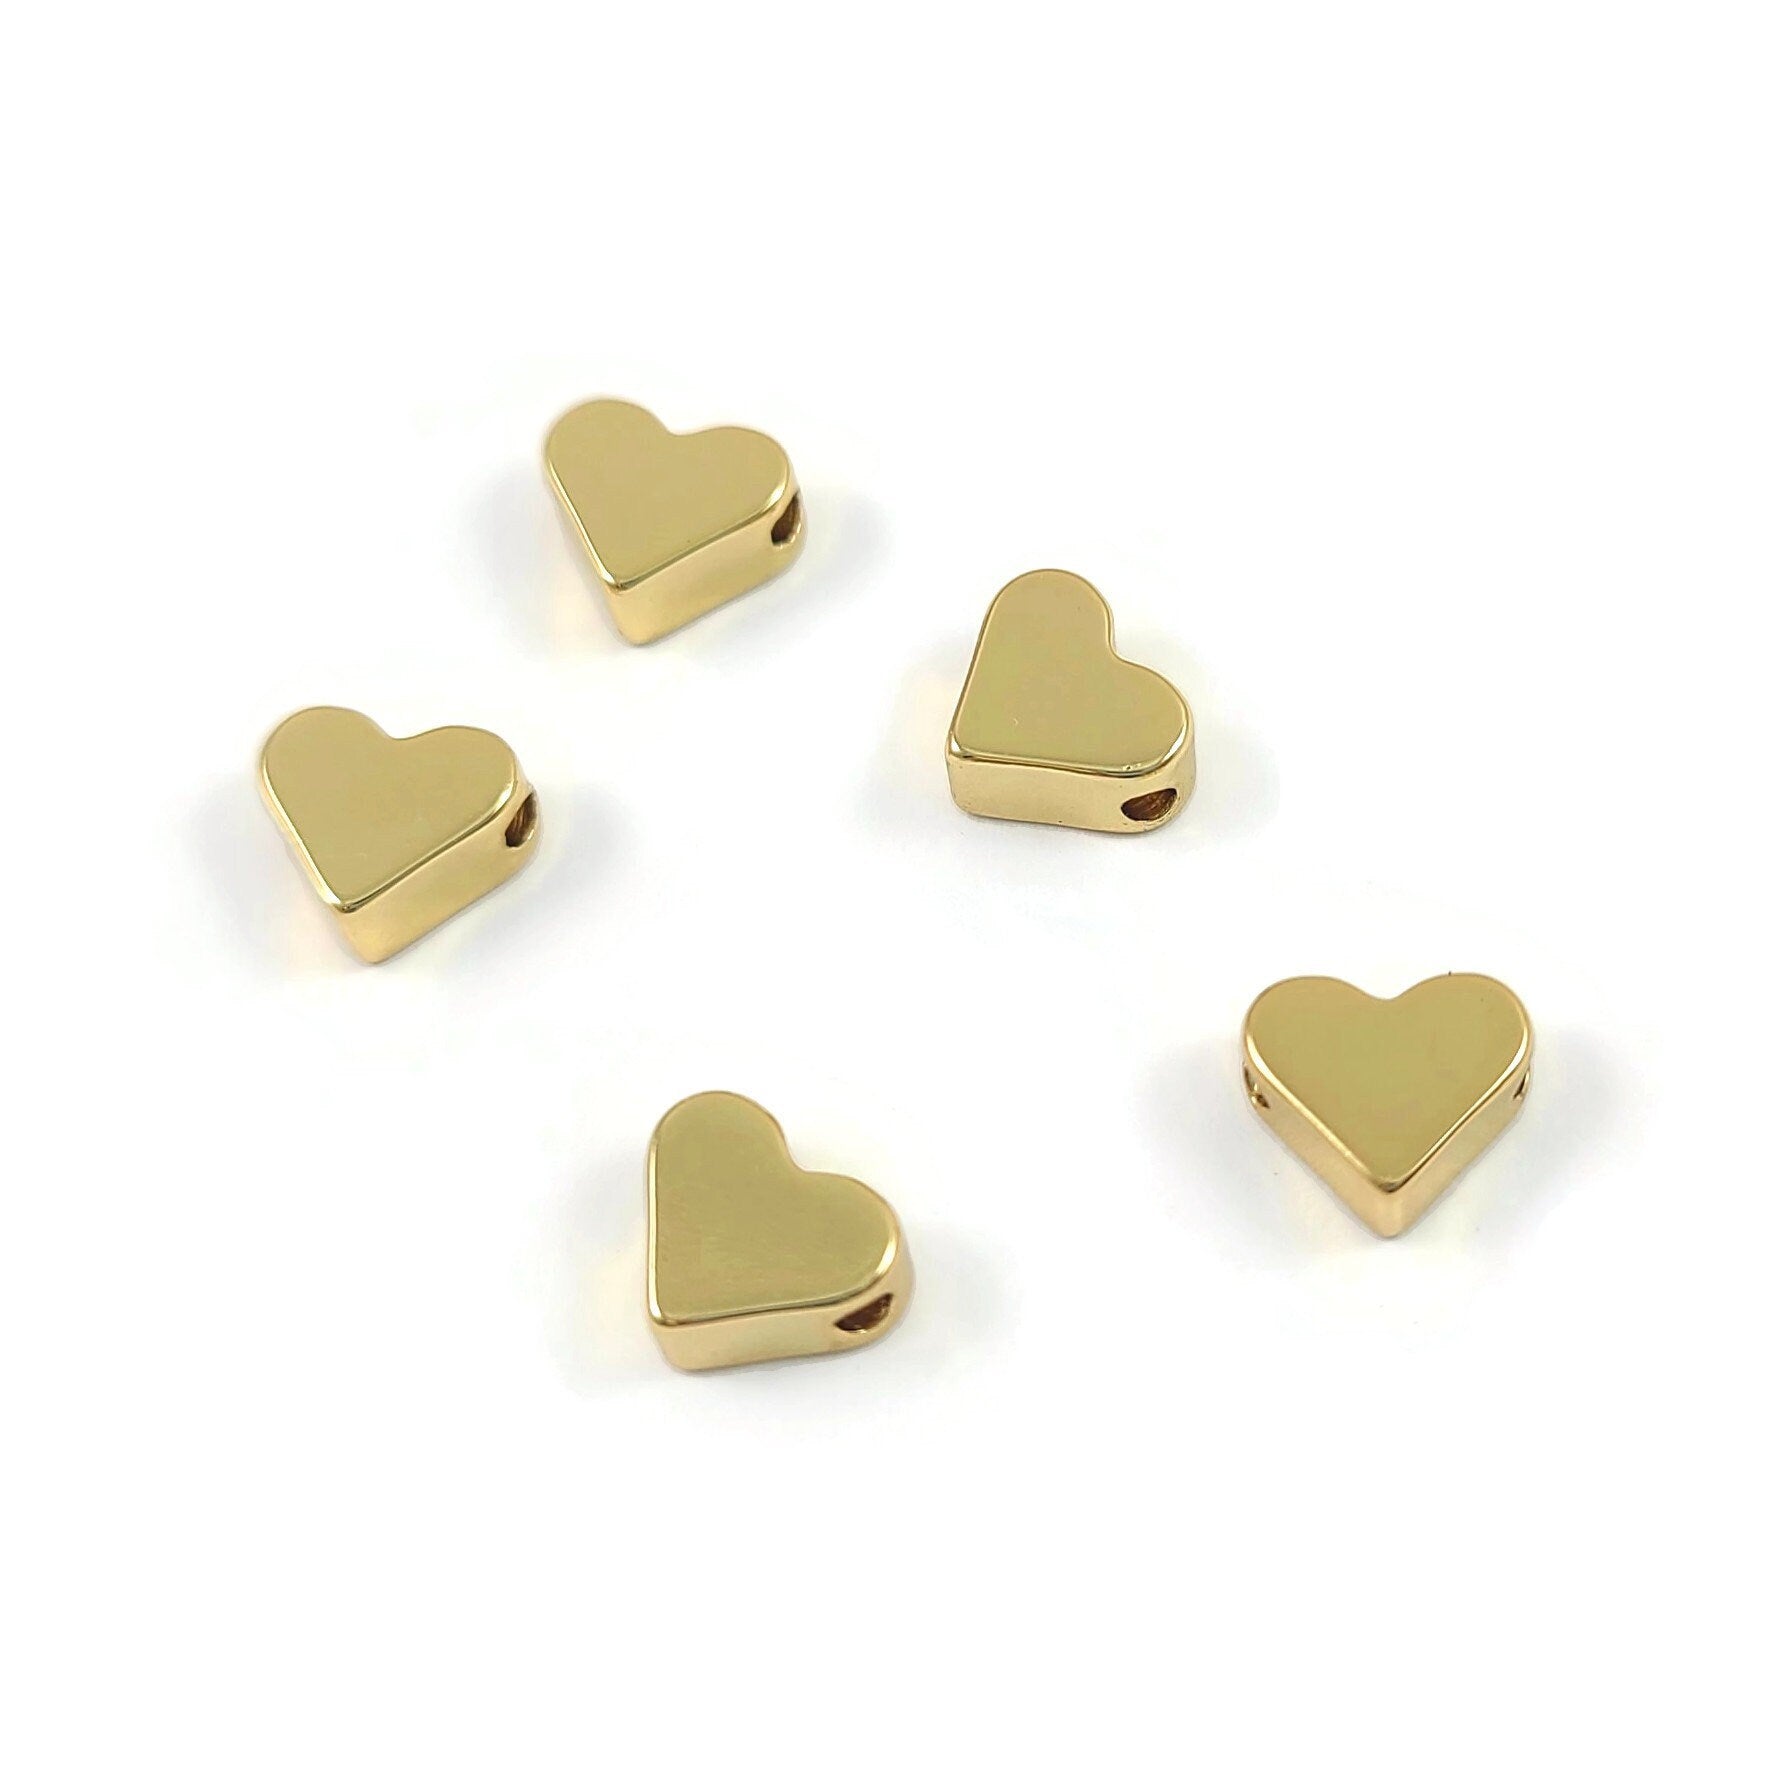 18K real gold plated heart beads, Hypoallergenic nickel free spacer beads, Bracelet making, Jewelry supplies